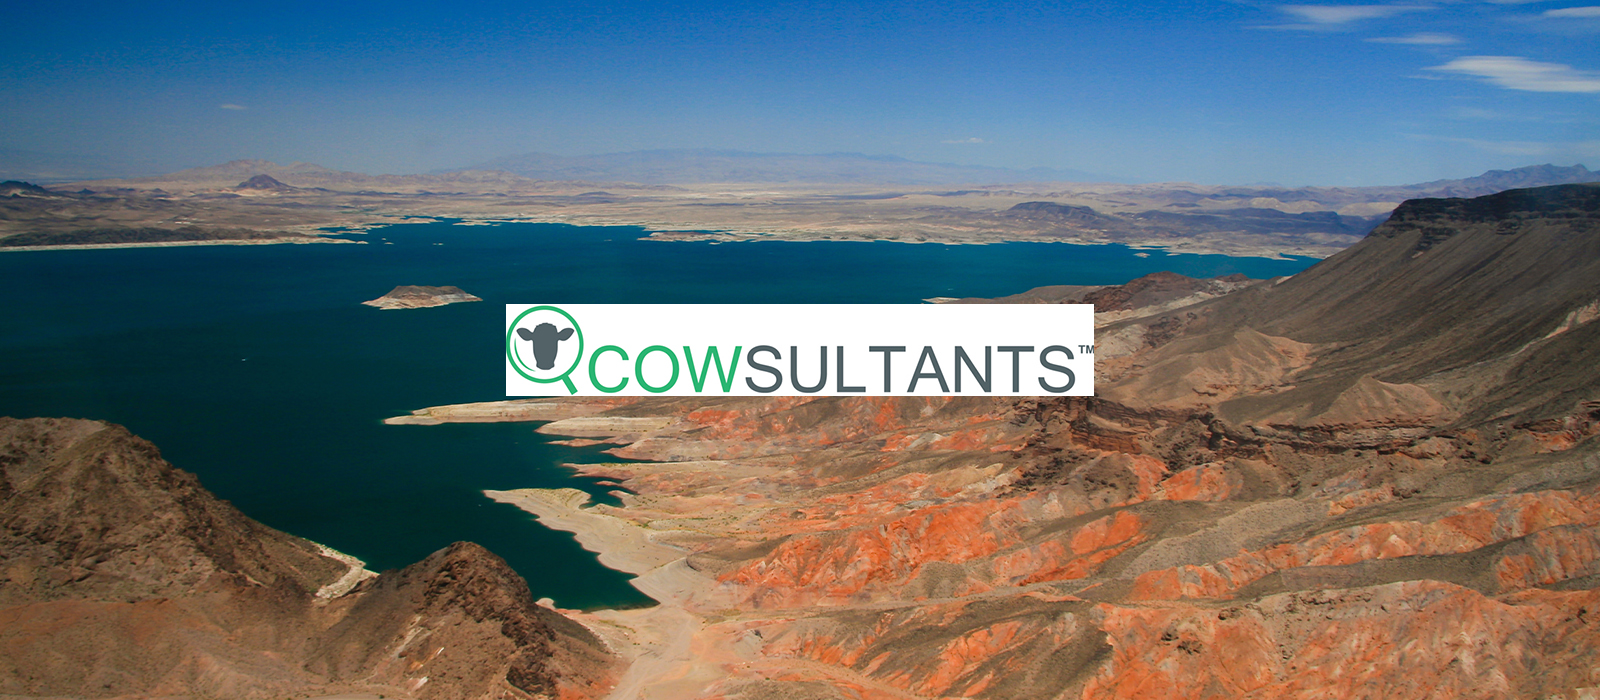 cowsultants-banner